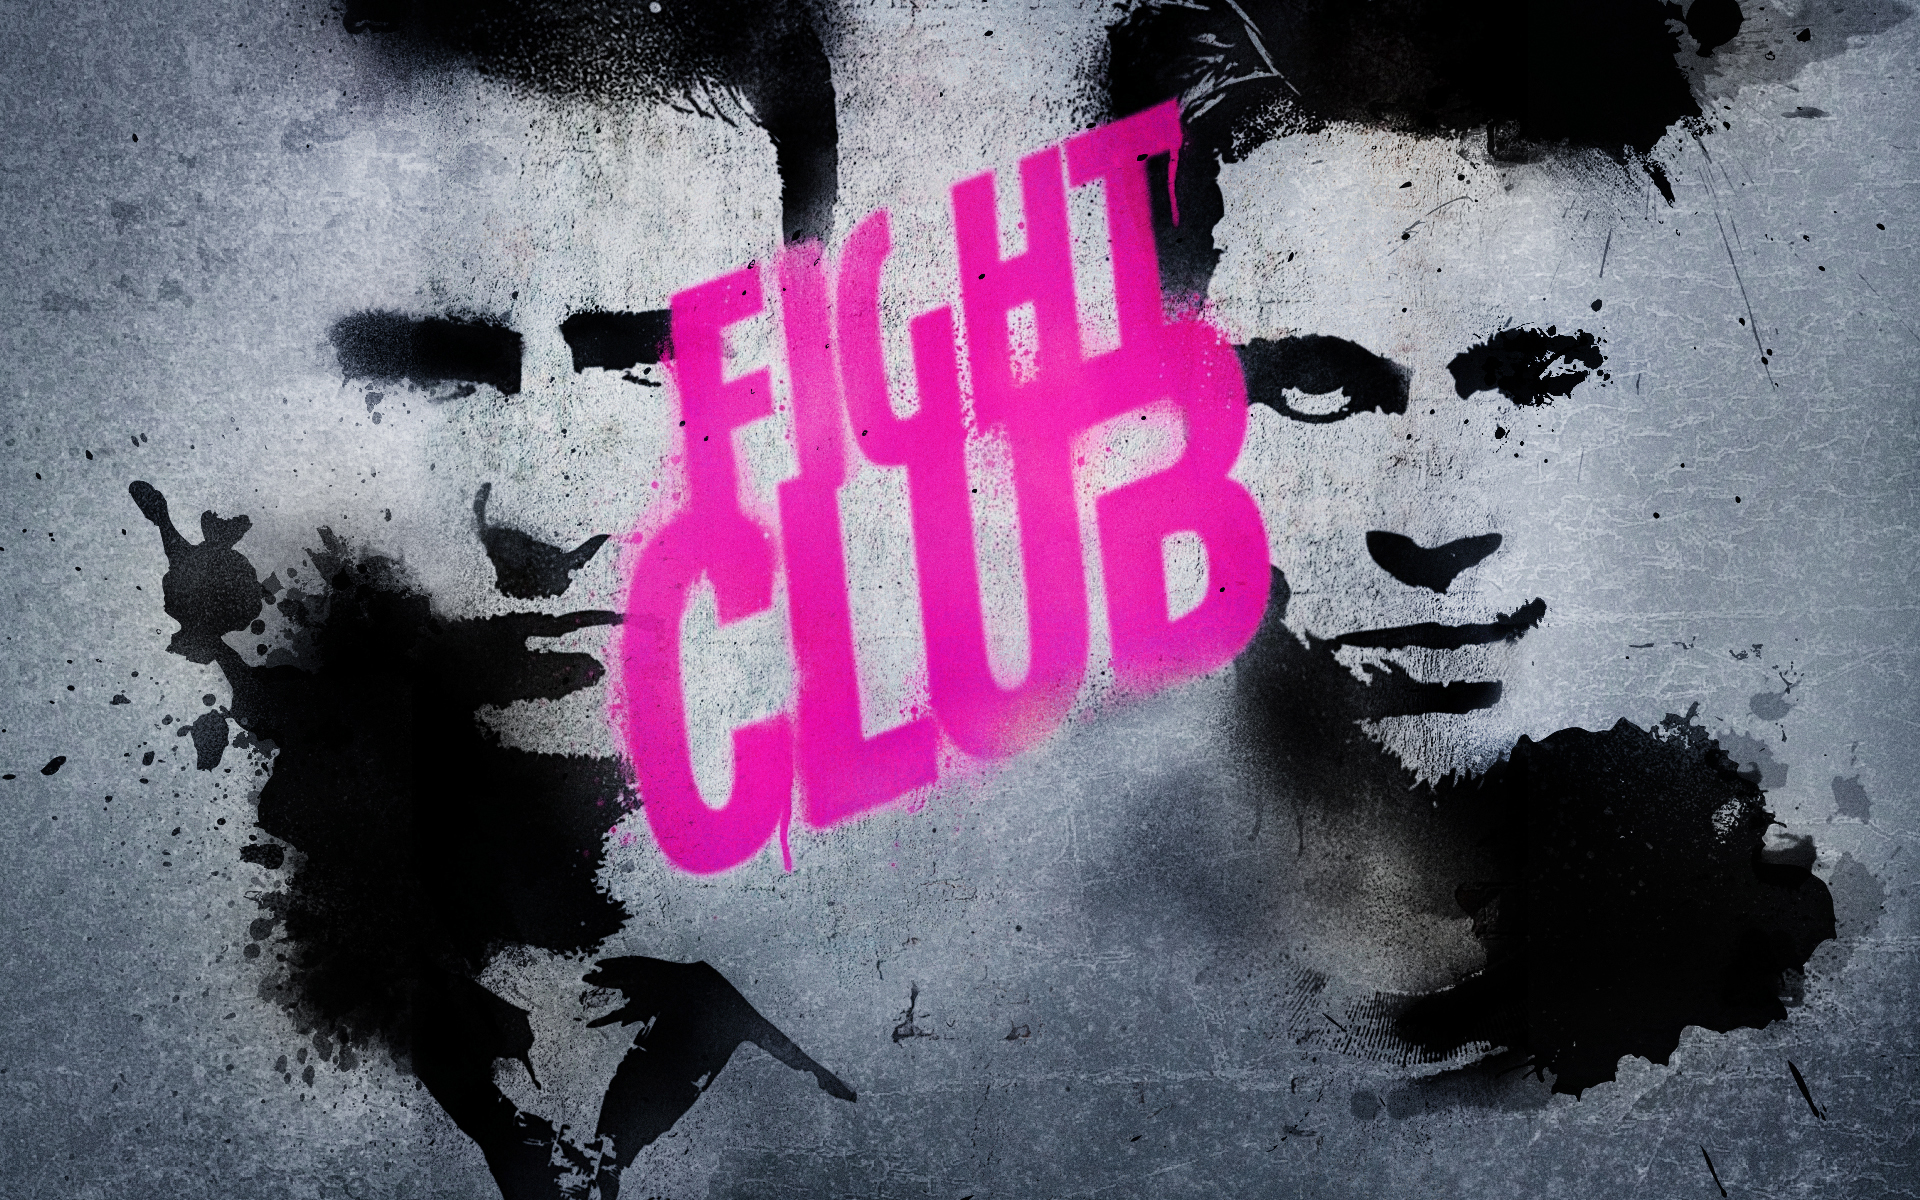 Teachers Created Elementary School FIGHT CLUB To Punish Students [VIDEO] - Freedom Force